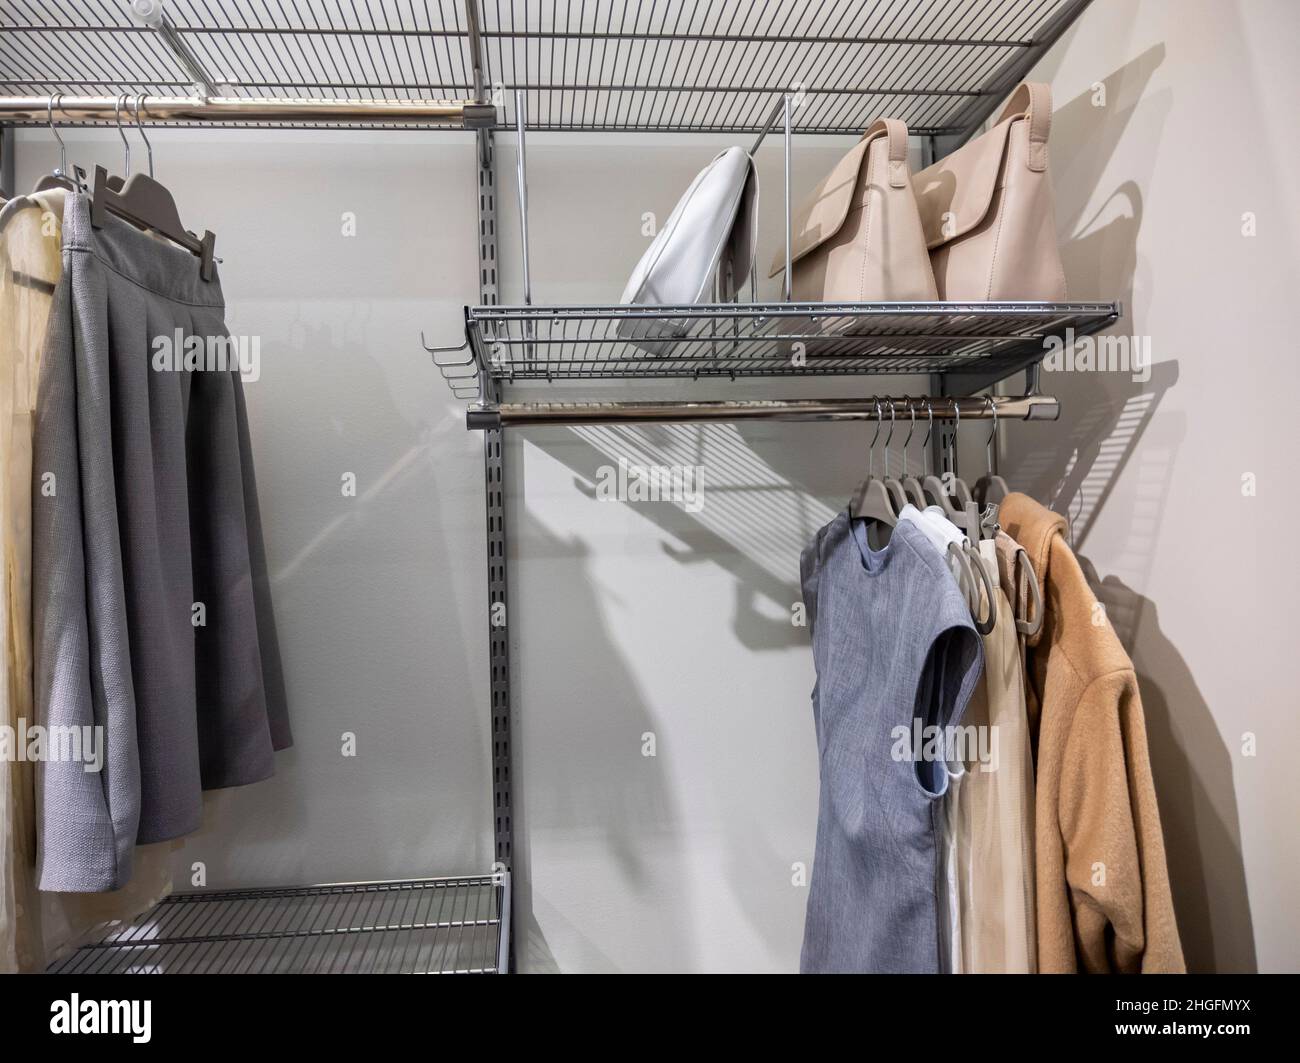 https://c8.alamy.com/comp/2HGFMYX/view-of-a-large-walk-in-closet-with-metal-organizing-racks-storing-dresses-skirts-jackets-and-purses-inside-of-it-2HGFMYX.jpg